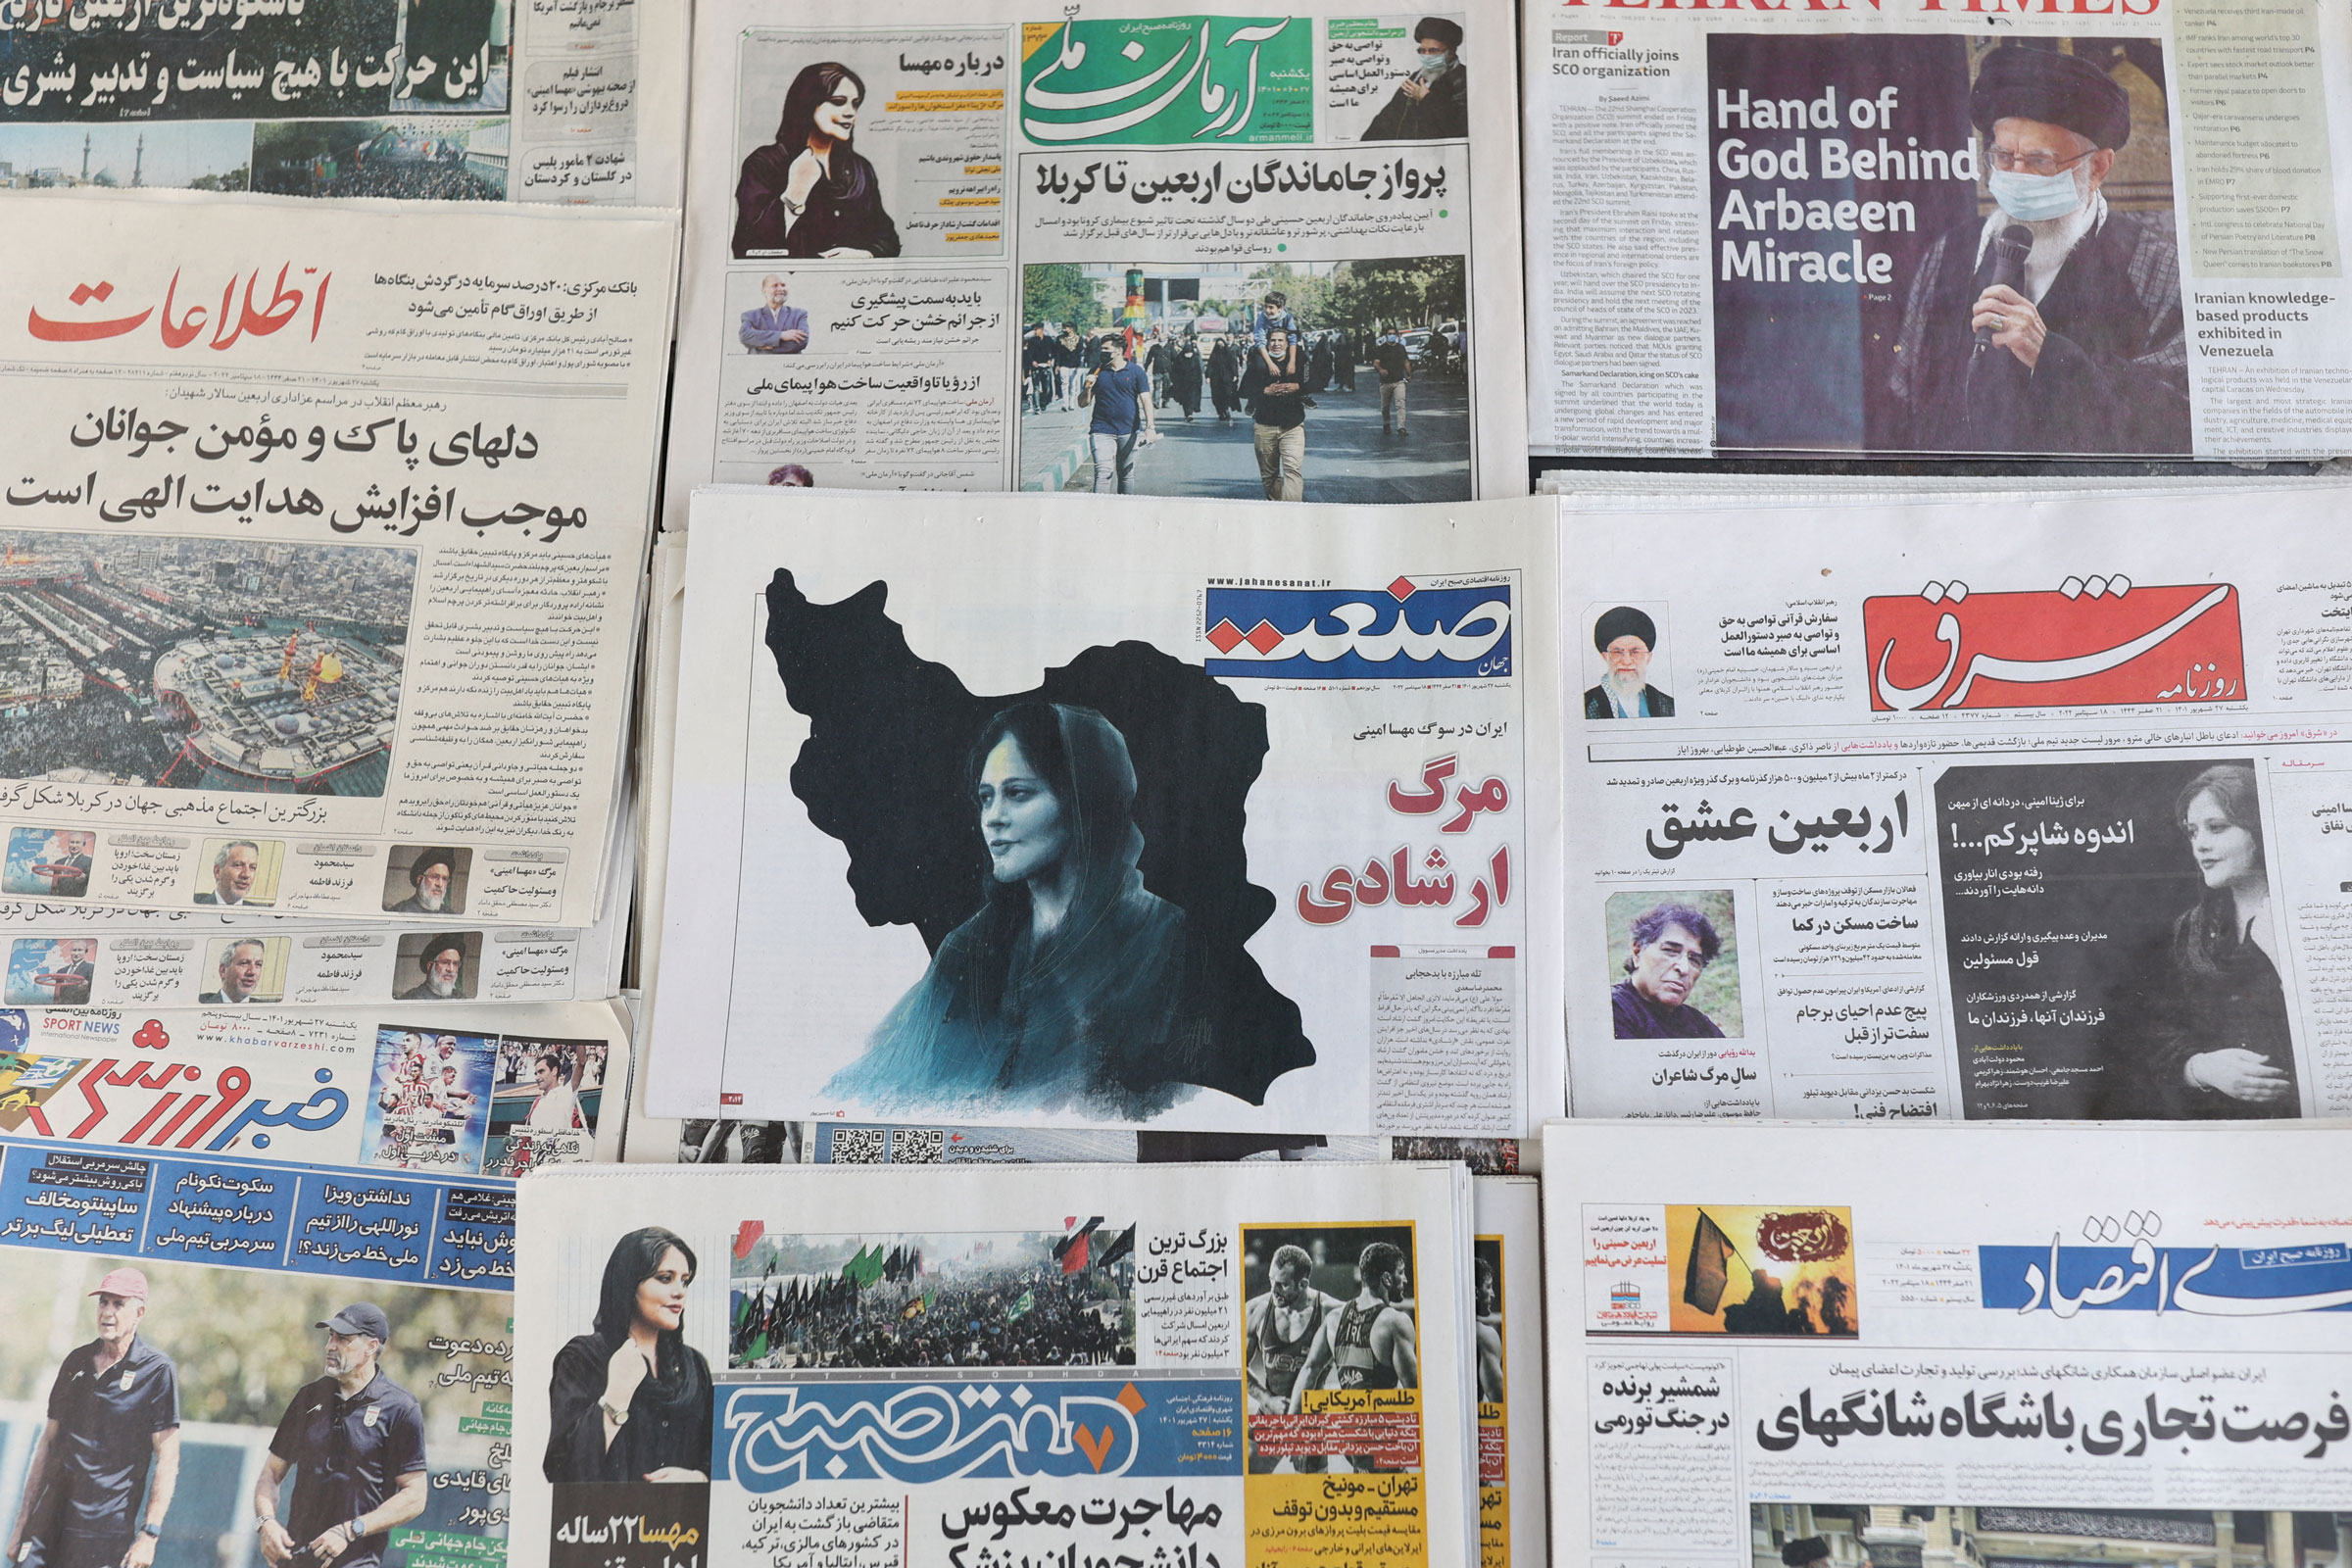 Newspapers with a cover picture of Mahsa Amini, a woman who died after being arrested by the Islamic republic's "morality police" are seen in Tehran